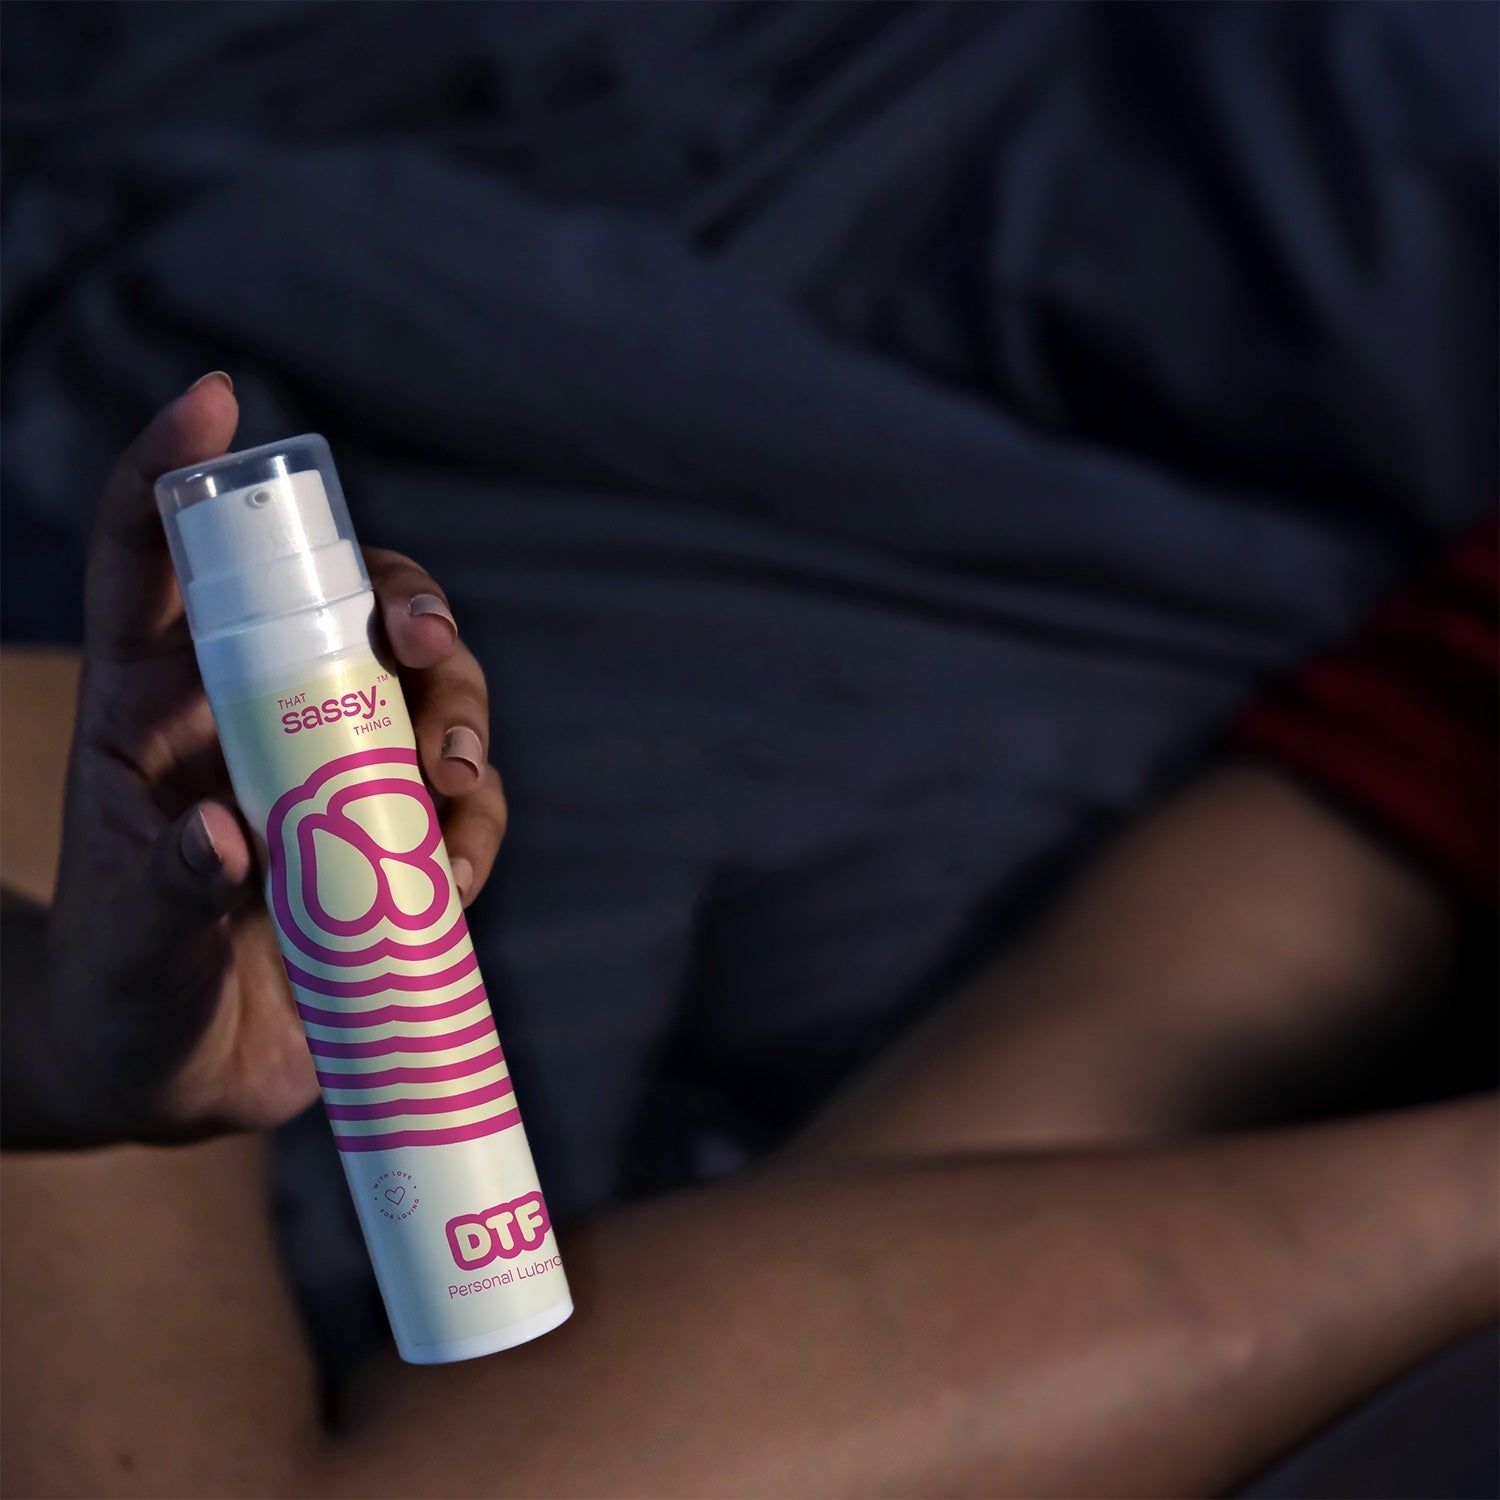 DTF All Natural Water-Based Personal Lubrication Gel Held In Hand While In Bed.